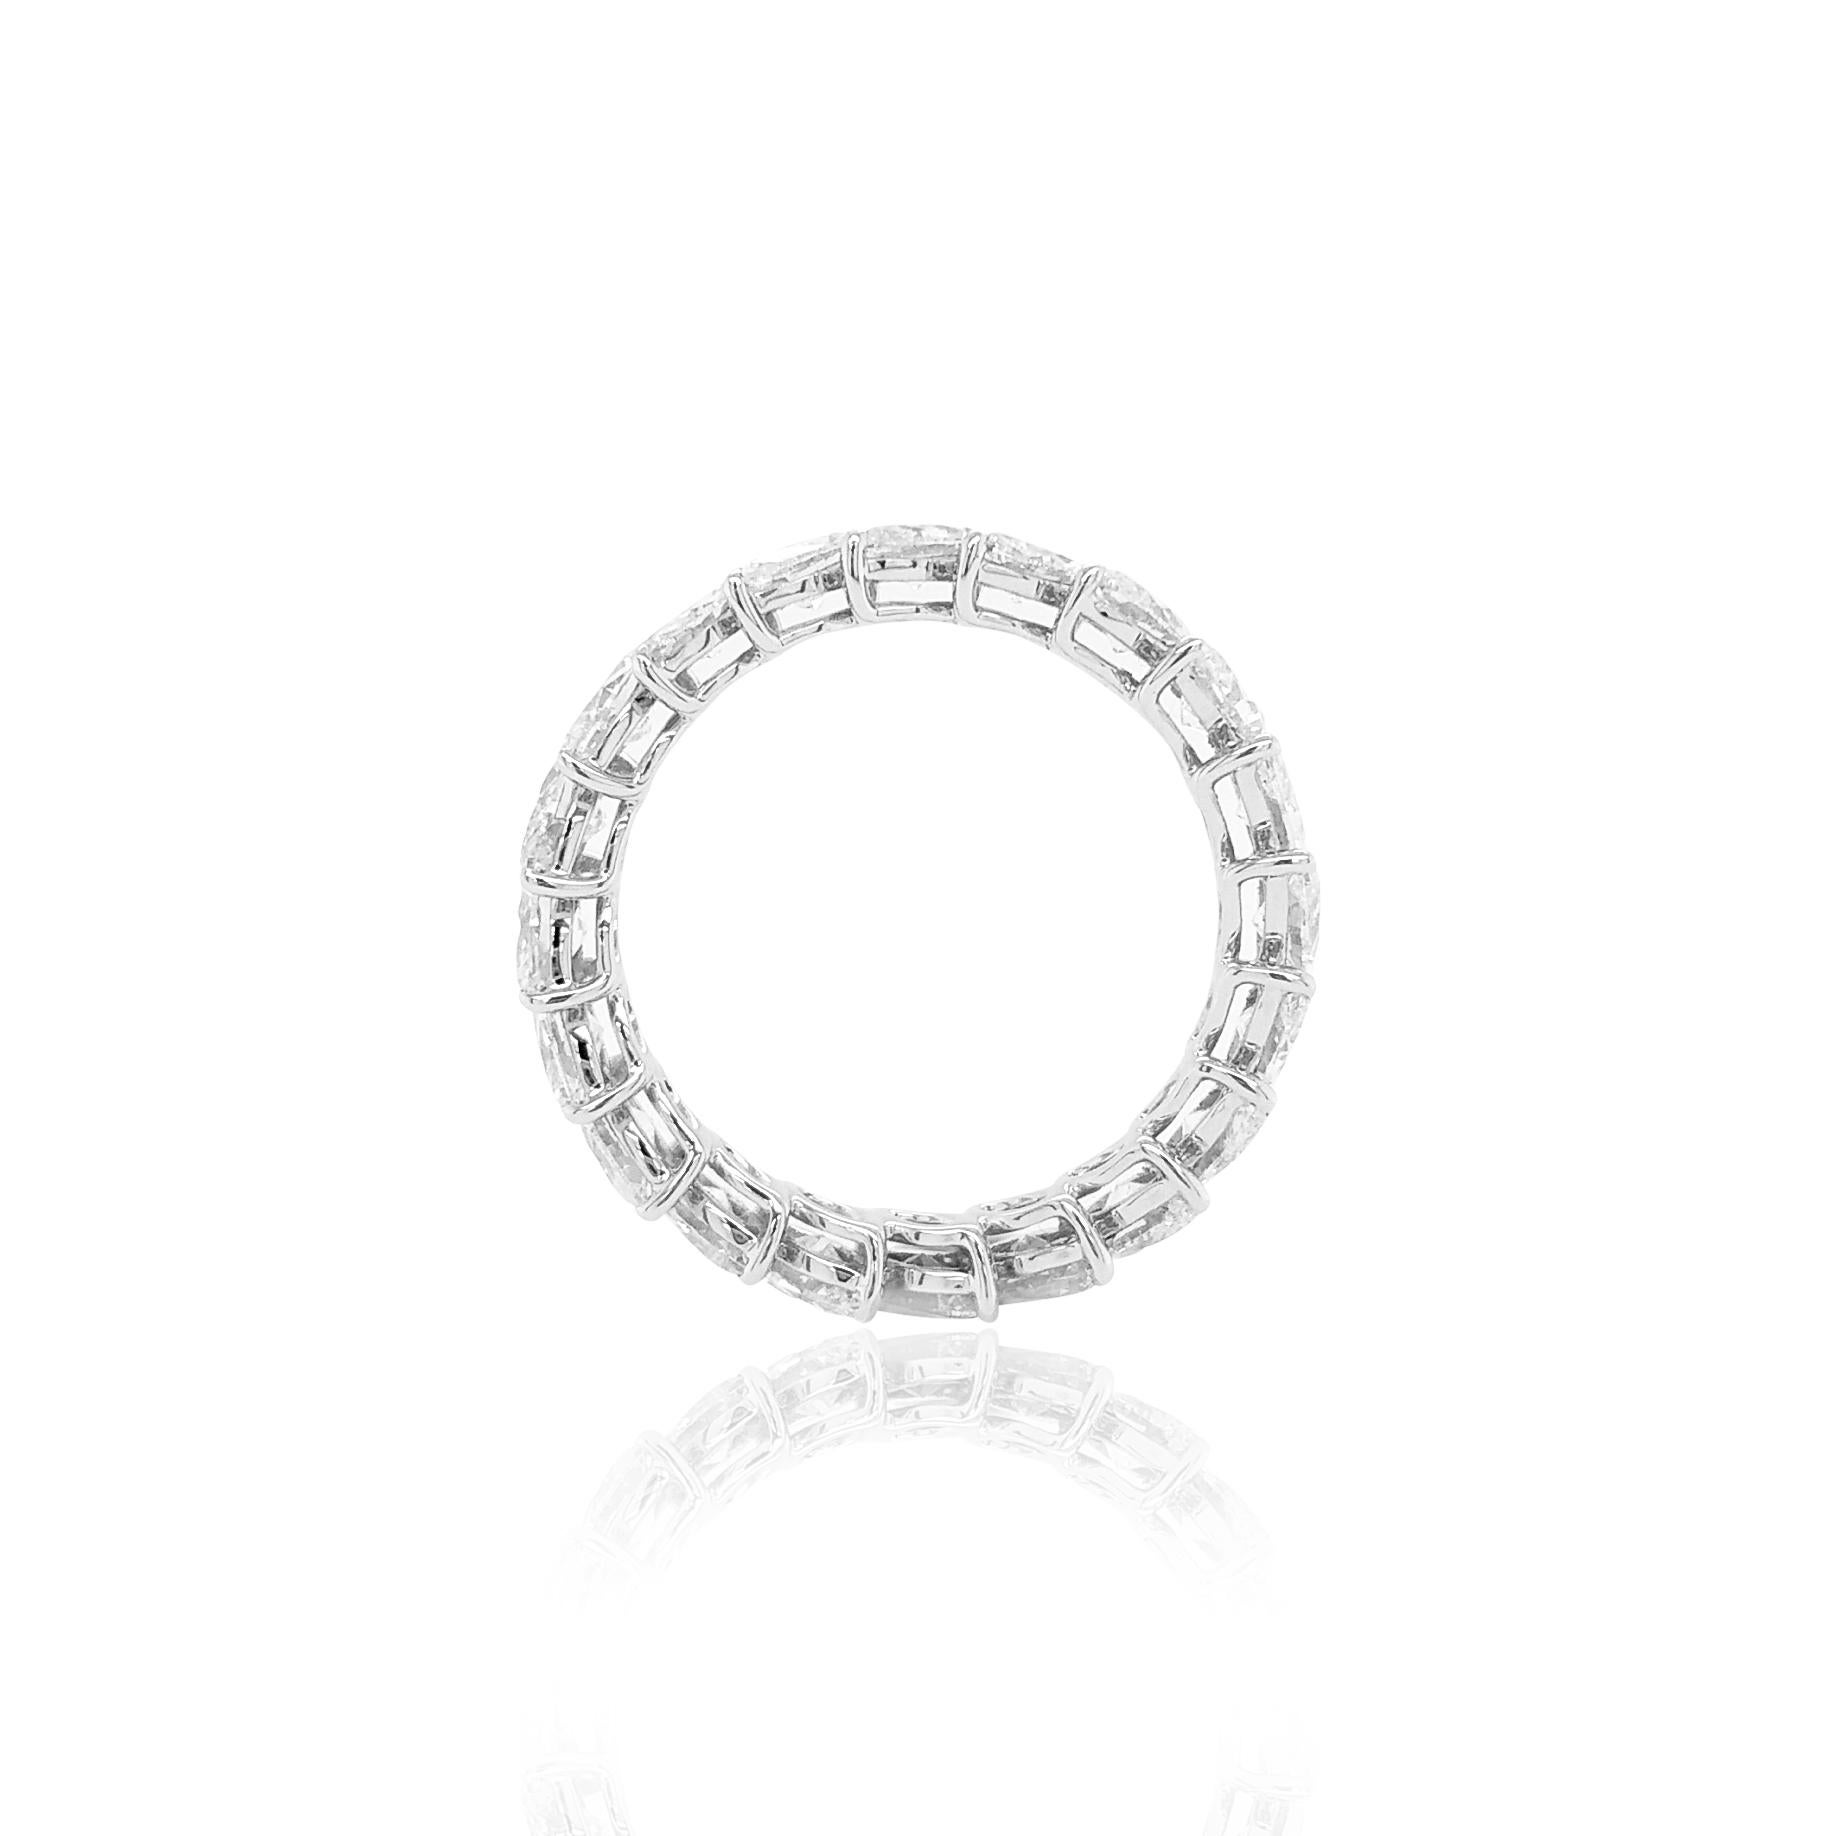 This striking Platinum ring features exceptional quality of the same color, shape, and size natural Marquise shape White Diamonds surrounded the ring, delicate halo of scintillating White Diamonds provide a touch of eternal love. This piece is truly